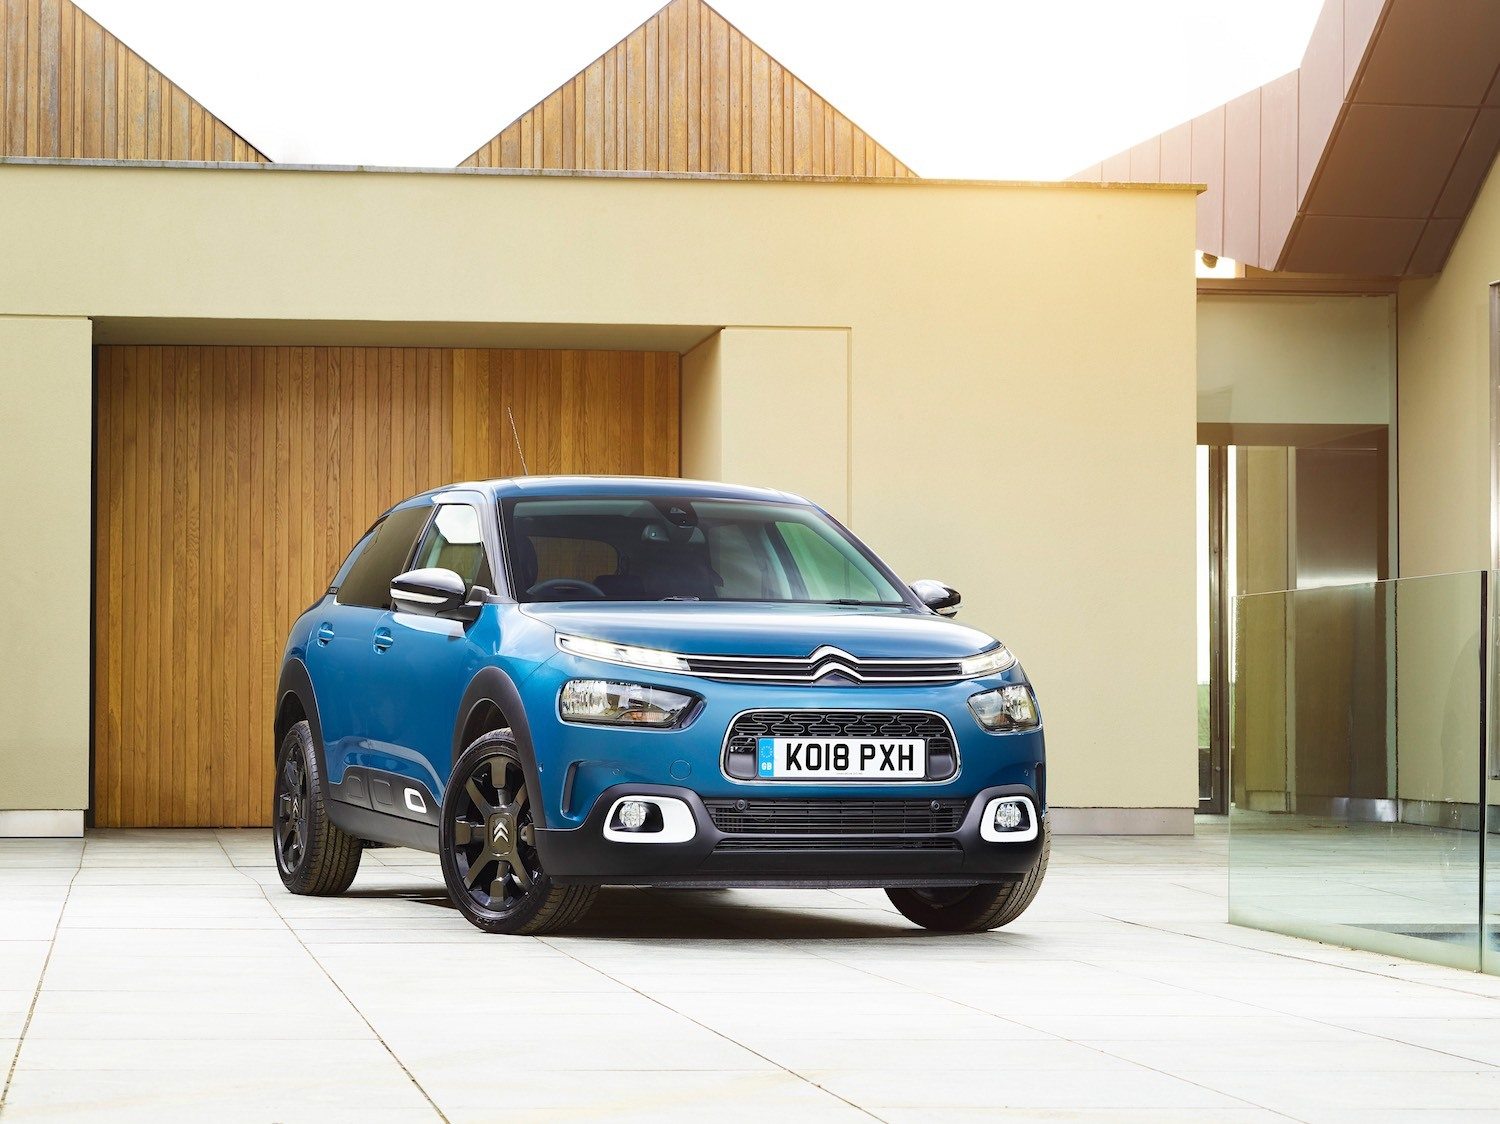 Tom Scanlan reviews the New Citroen Cactus for Drive 3